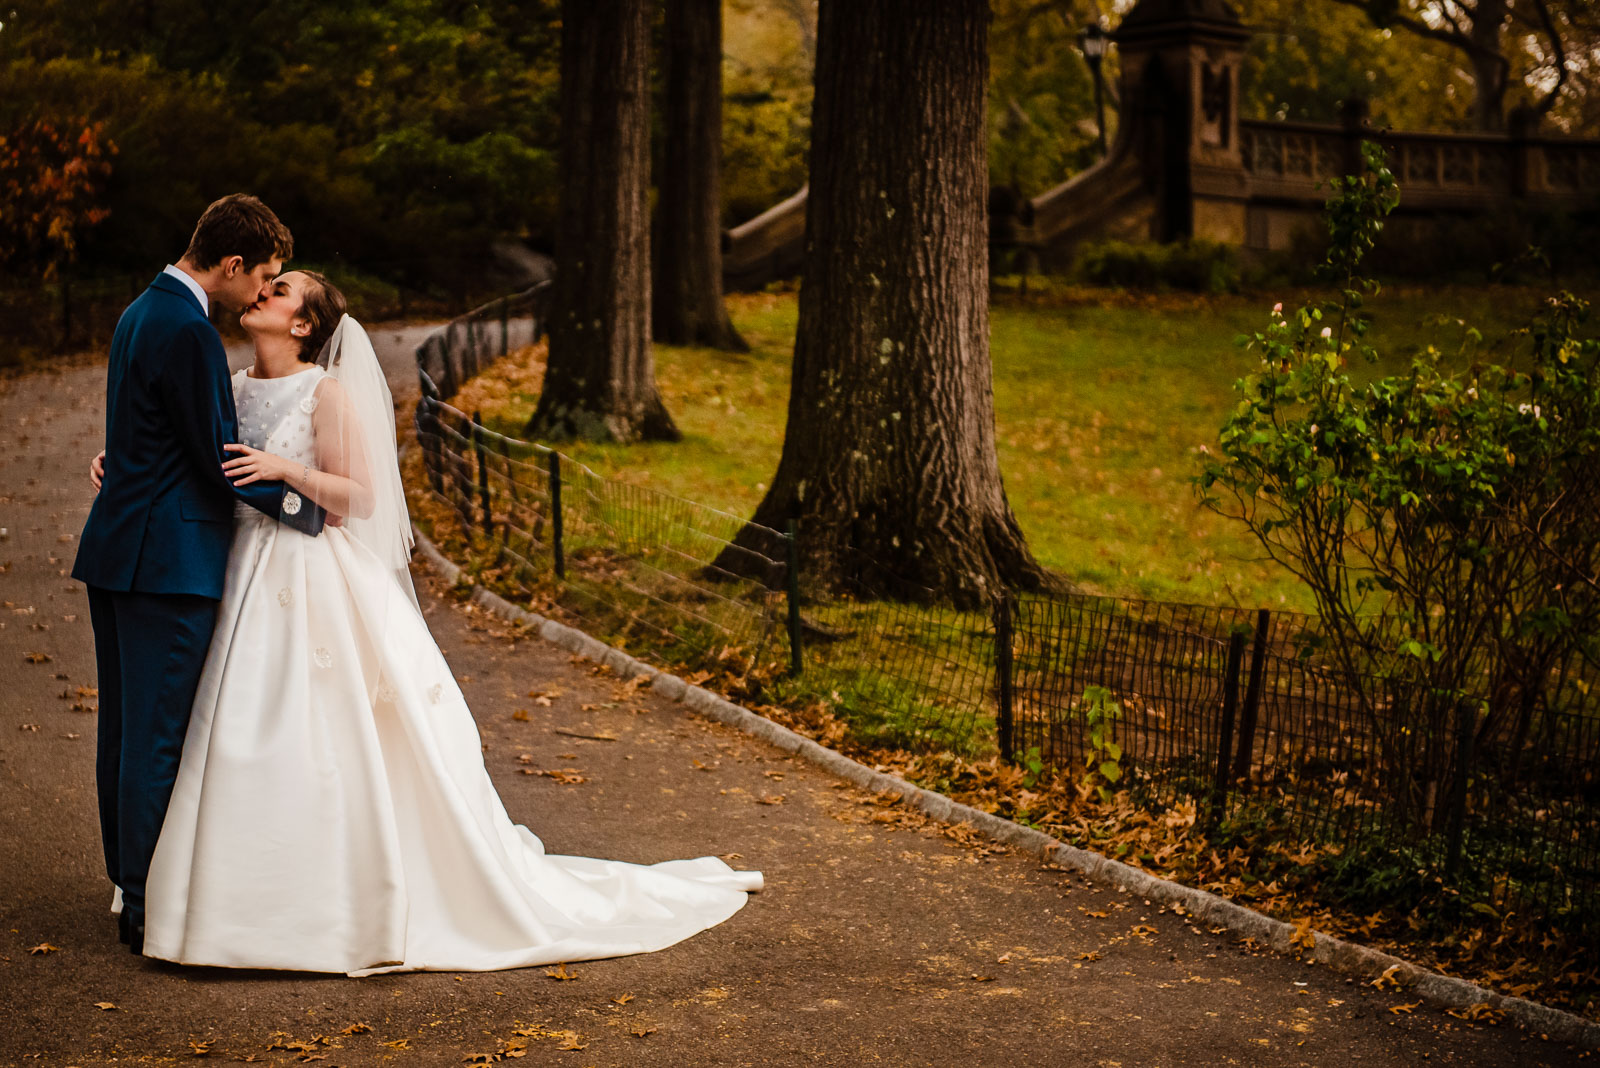 Bride and groom portrait in Central Park